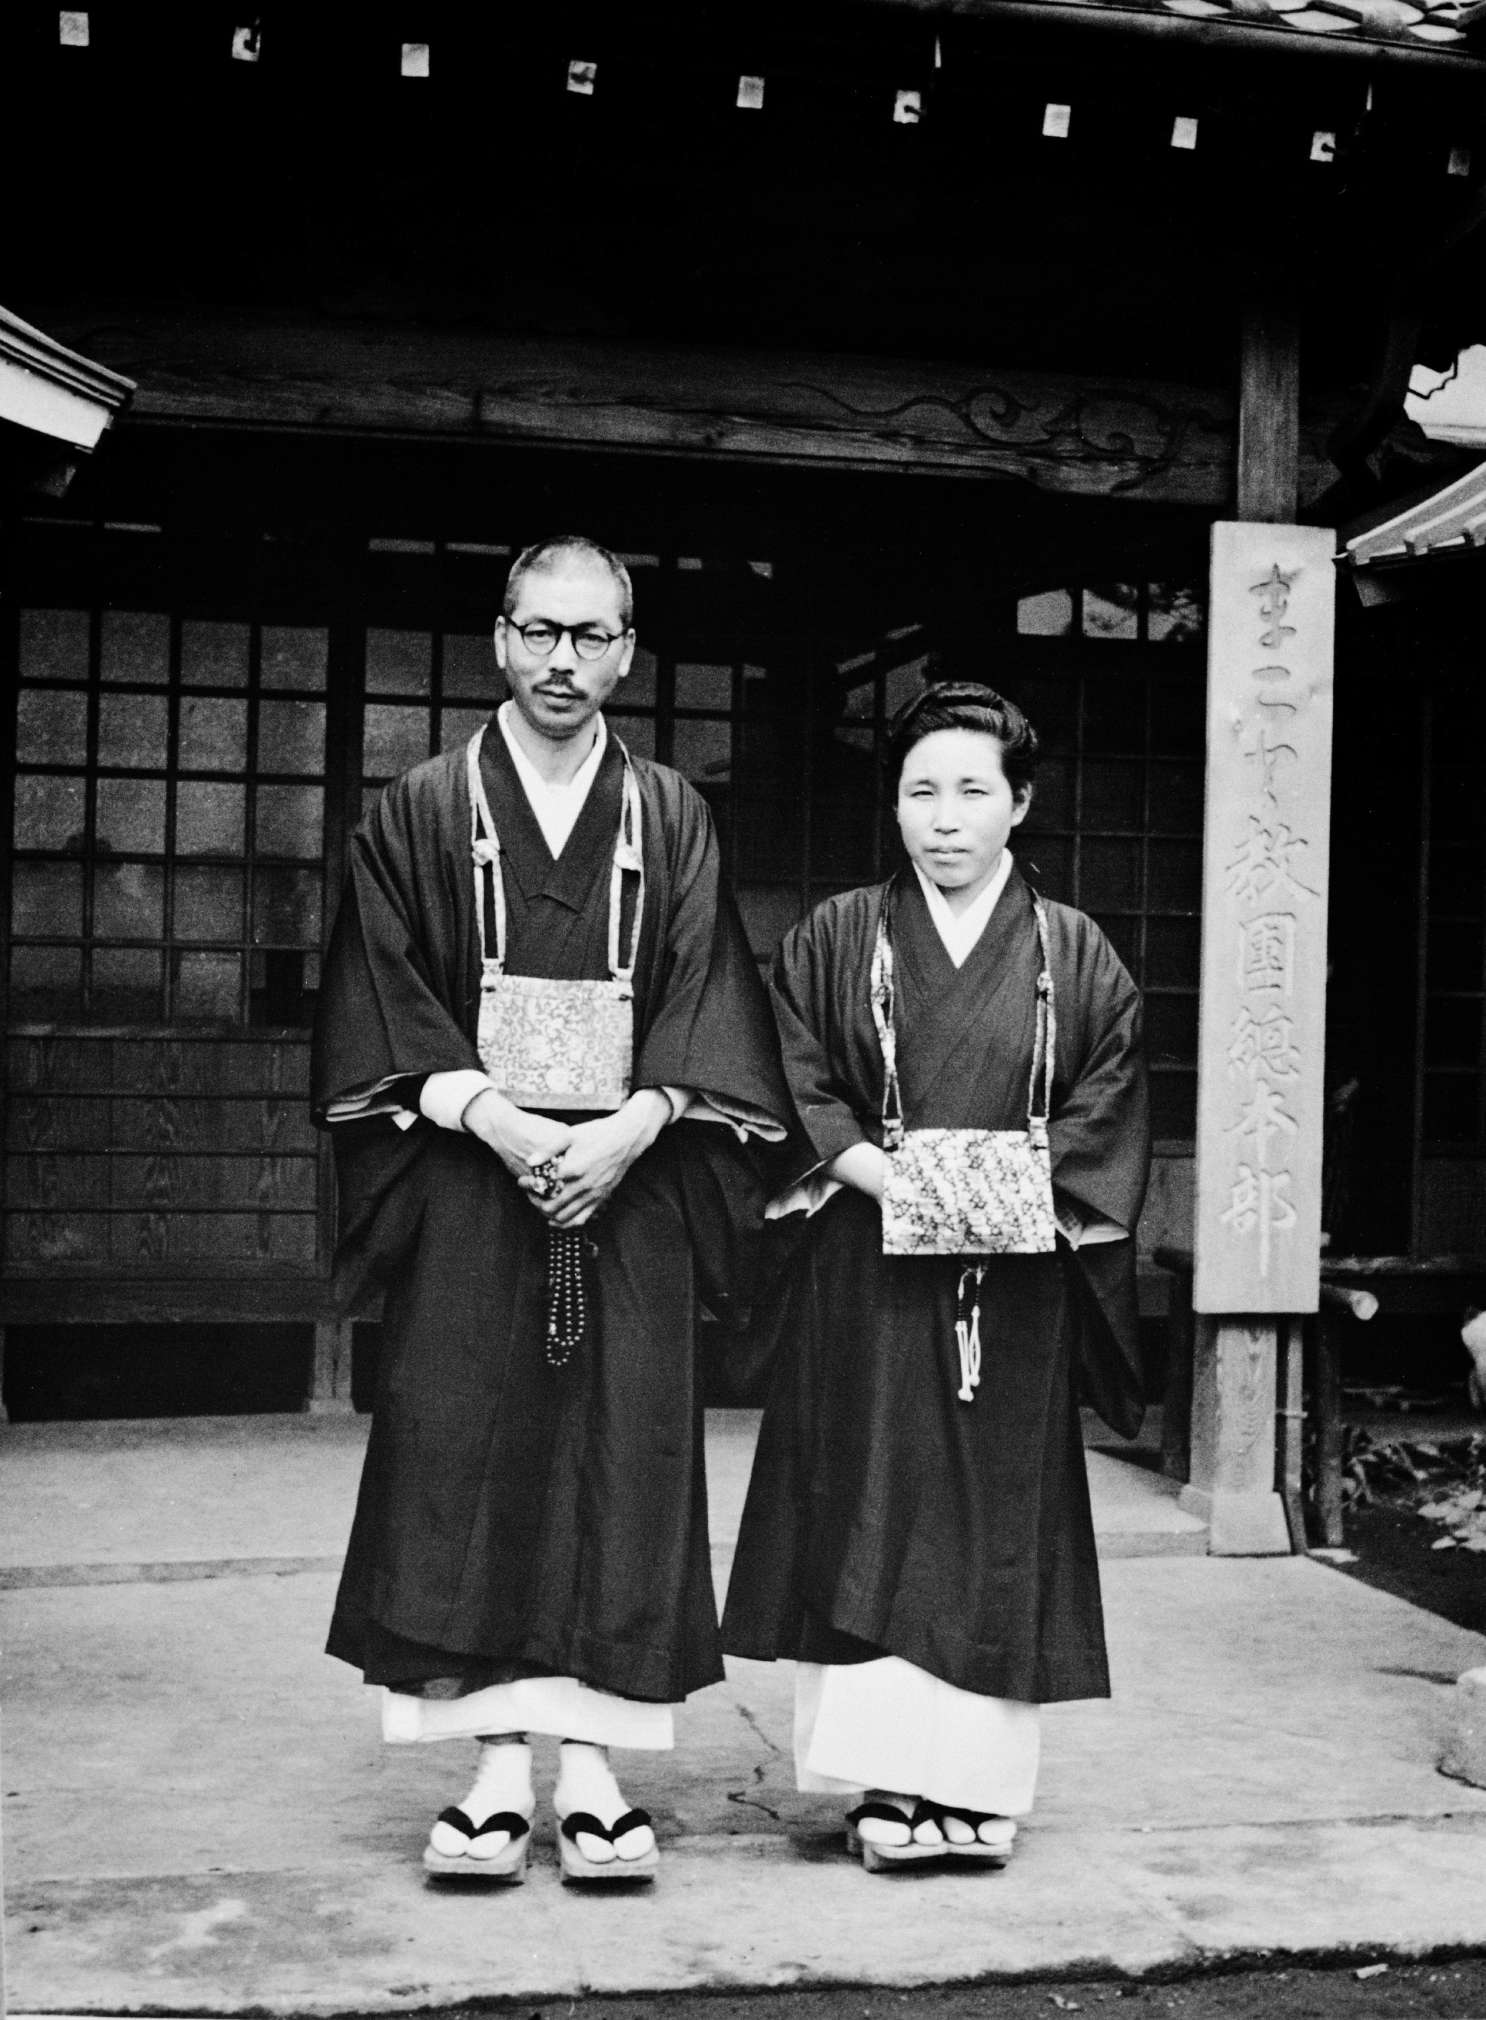 Shinjo and Tomoji wearing priestly robes stand at the entrance to Shinchoji temple; a pillar bearing Japanese calligraphy is visible to the right.